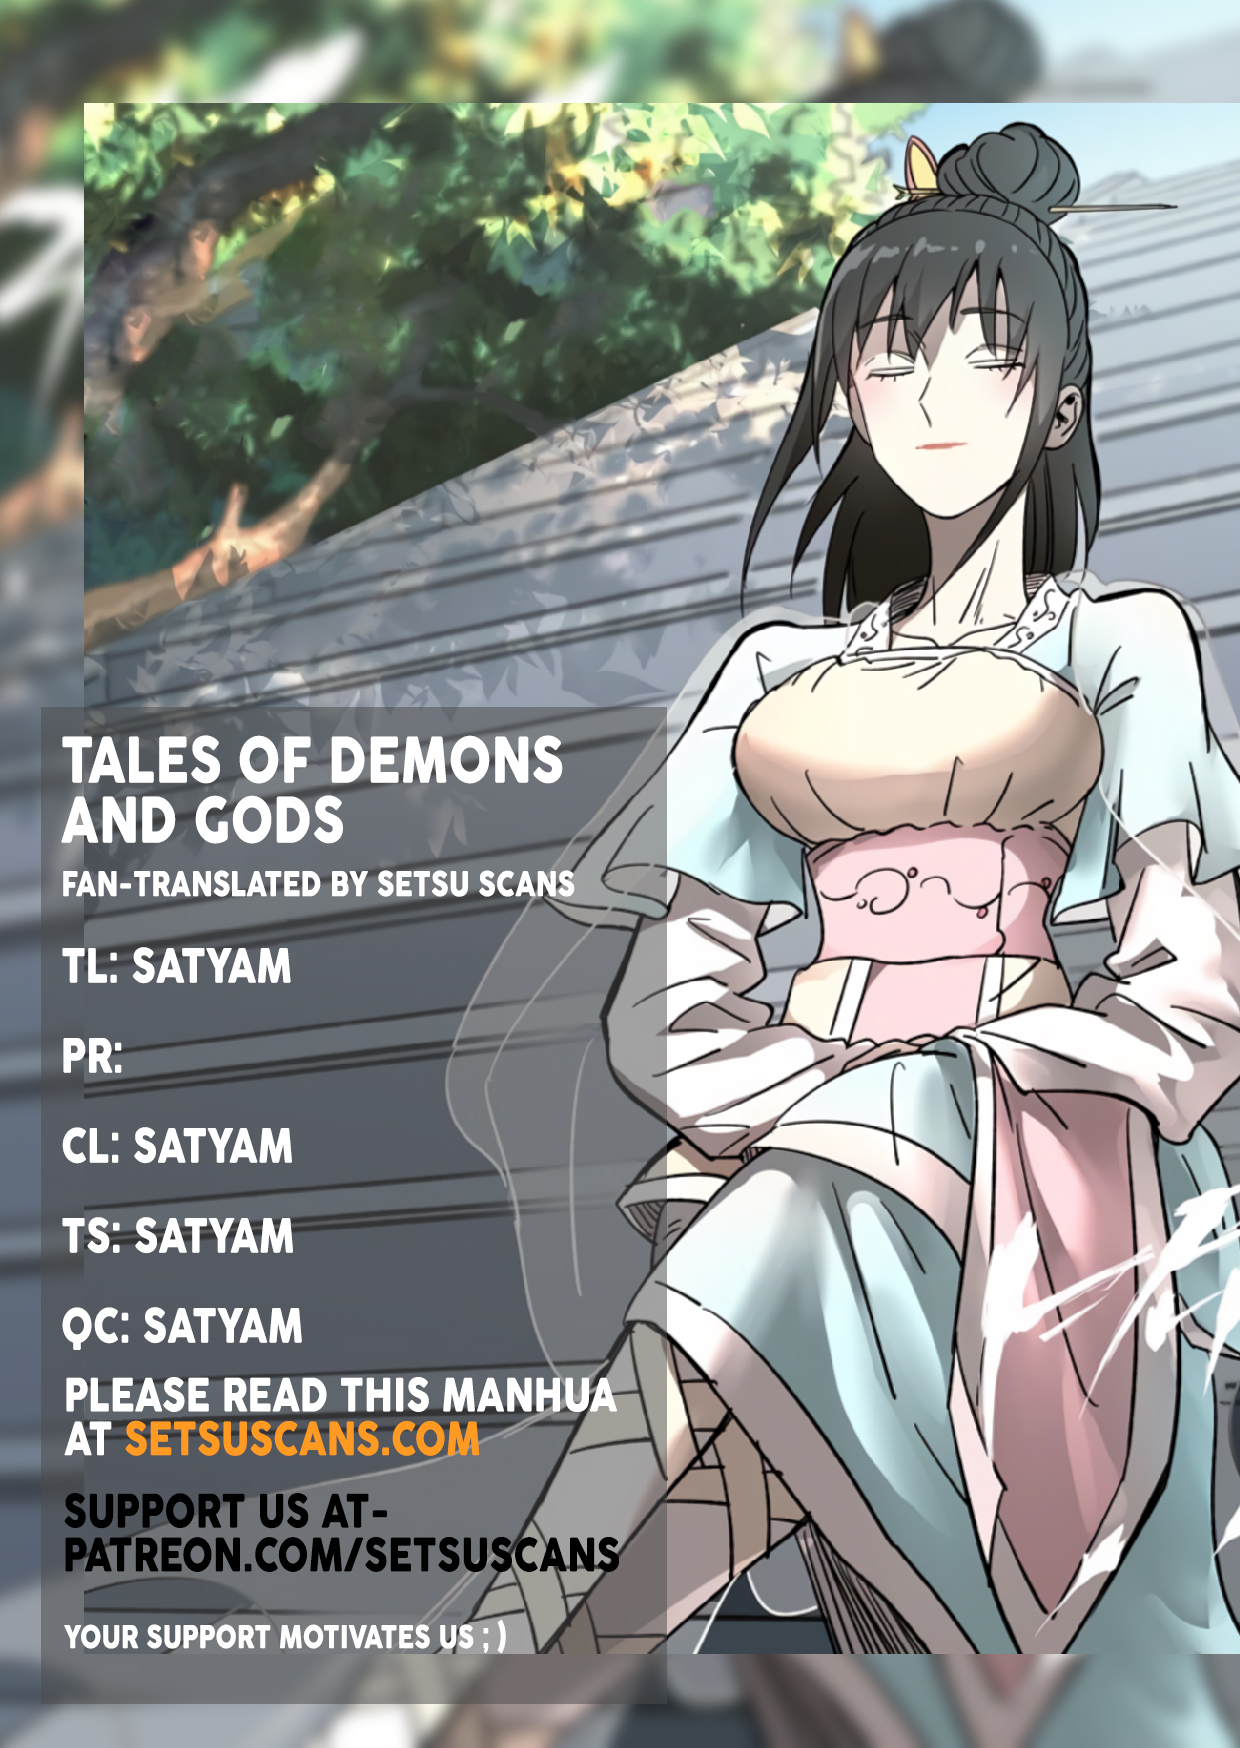 Tales of Demons and Gods - Chapter 20152 - Enter the array! (2) - Image 1